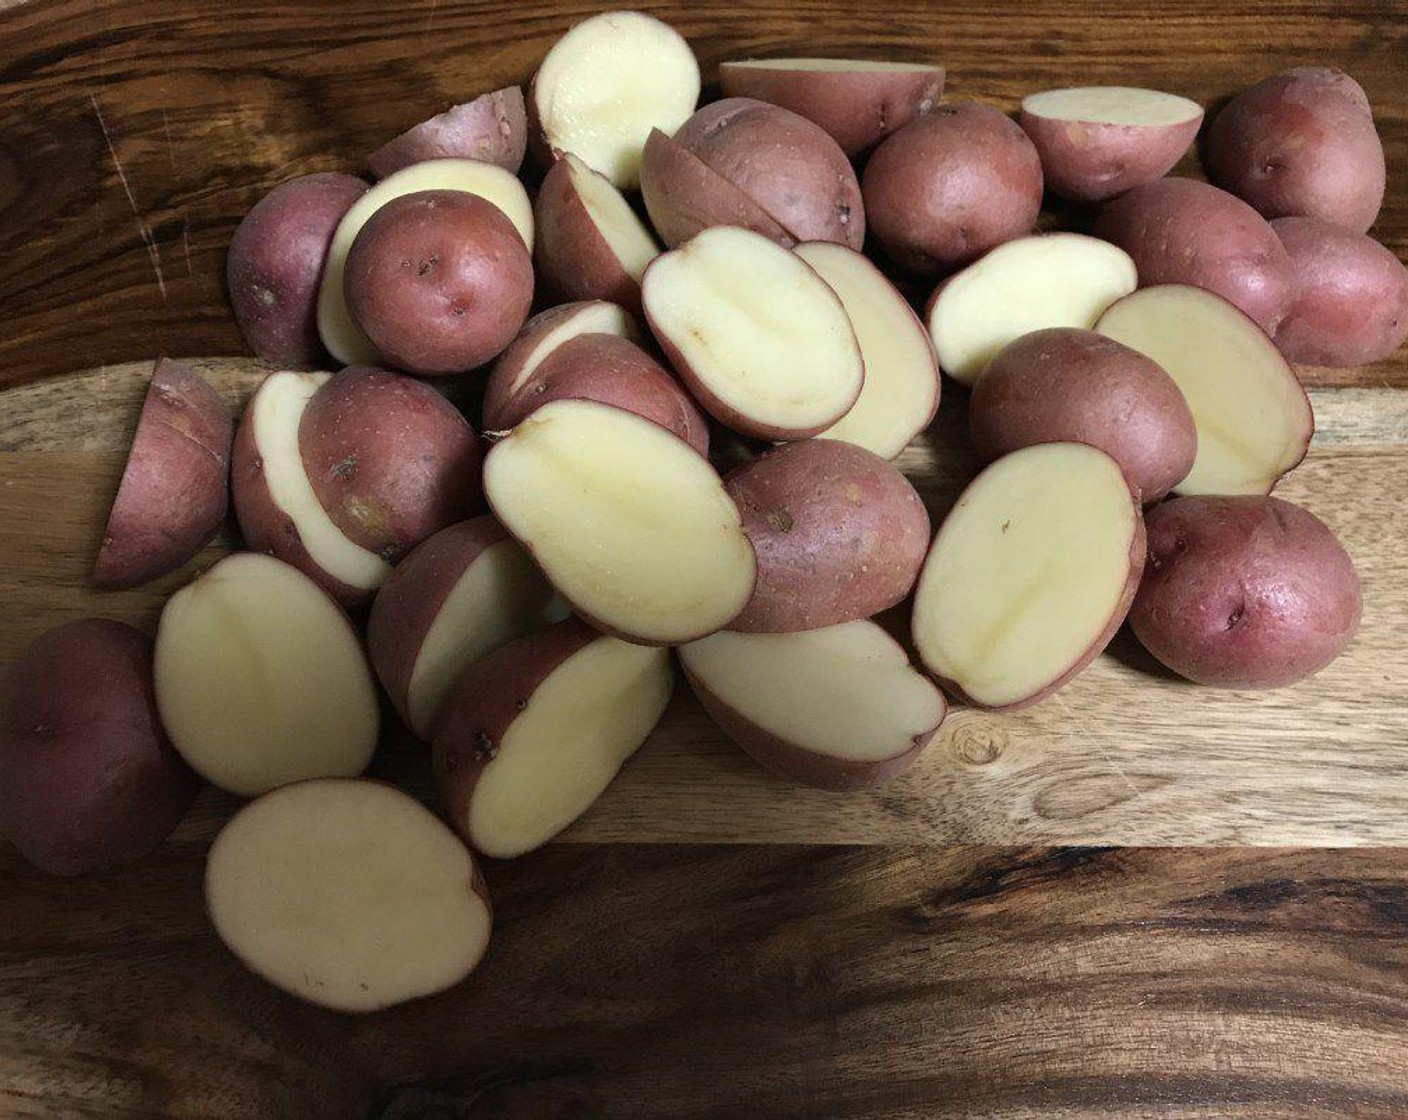 step 1 Start out by preparing the Baby Red Potatoes (9 cups). Cut the biggest ones in half or quarters. If you can't find baby potatoes, you can still use larger ones and cut into bite-sized pieces.